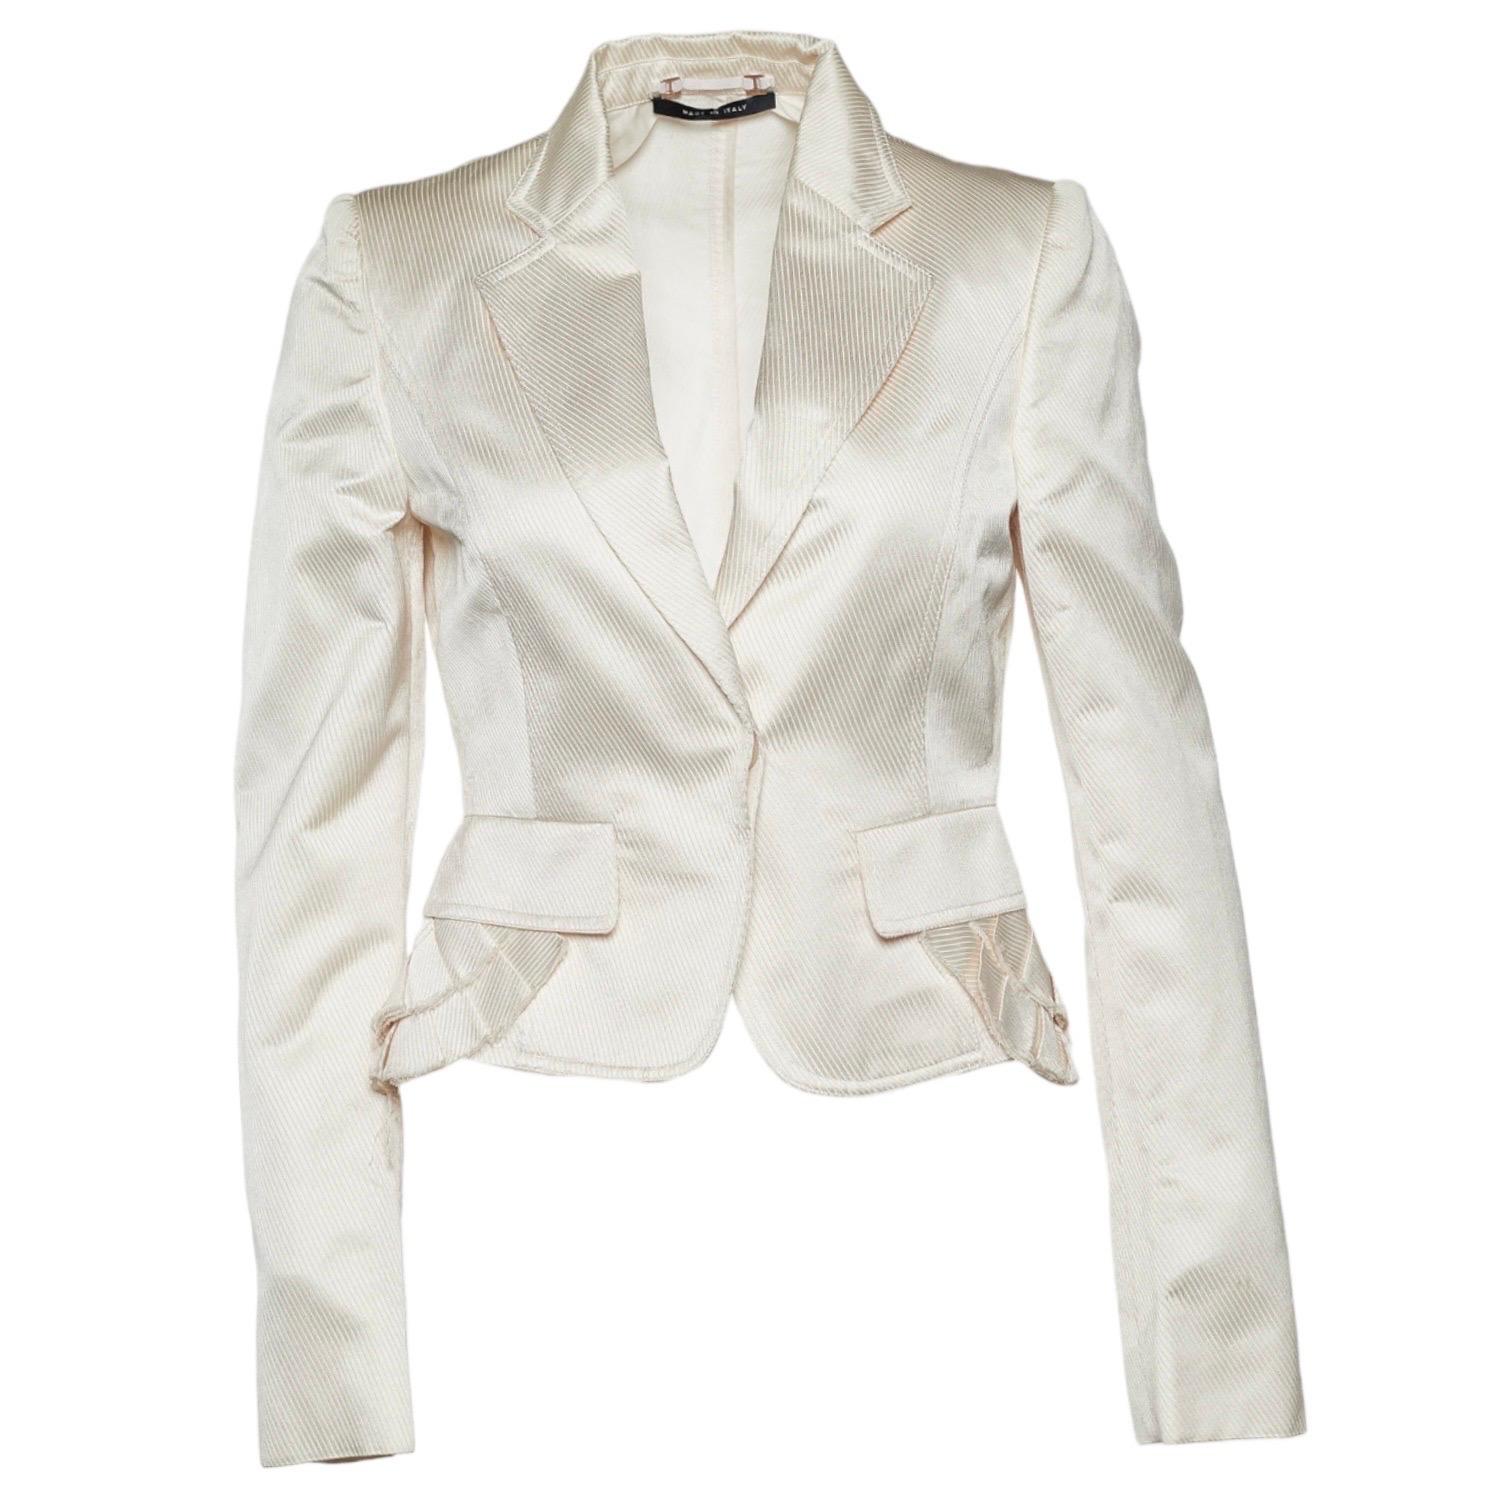 GUCCI BY TOM FORD S/S 2004 Frayed Silk Ensemble Pleated Pants & Jacket Blazer In Good Condition For Sale In Switzerland, CH